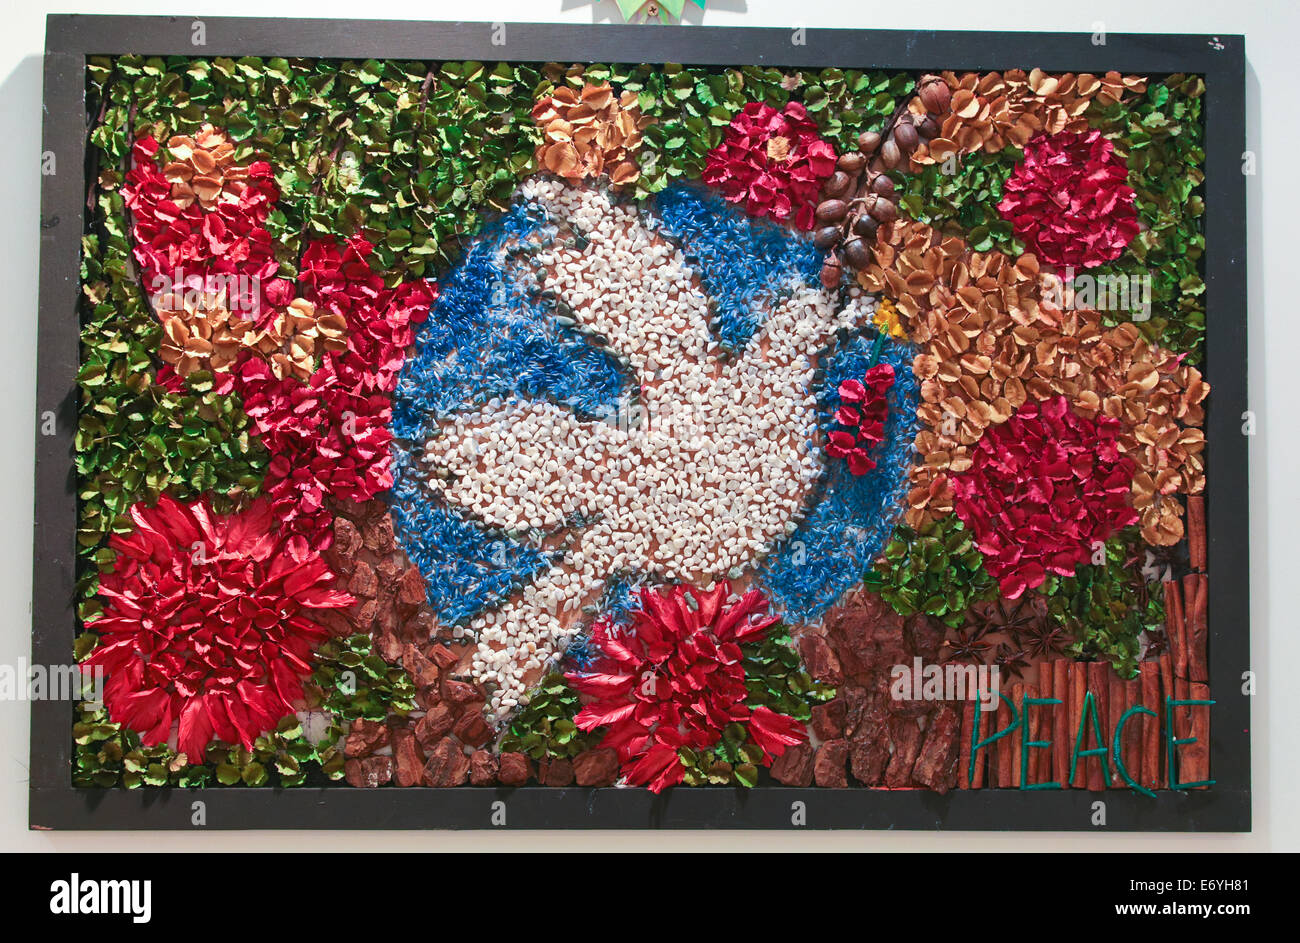 Picture of dove, symbol of peace made from nature elements such as flower and beans at FLORIA event held in Putrajaya, Malaysia. Stock Photo